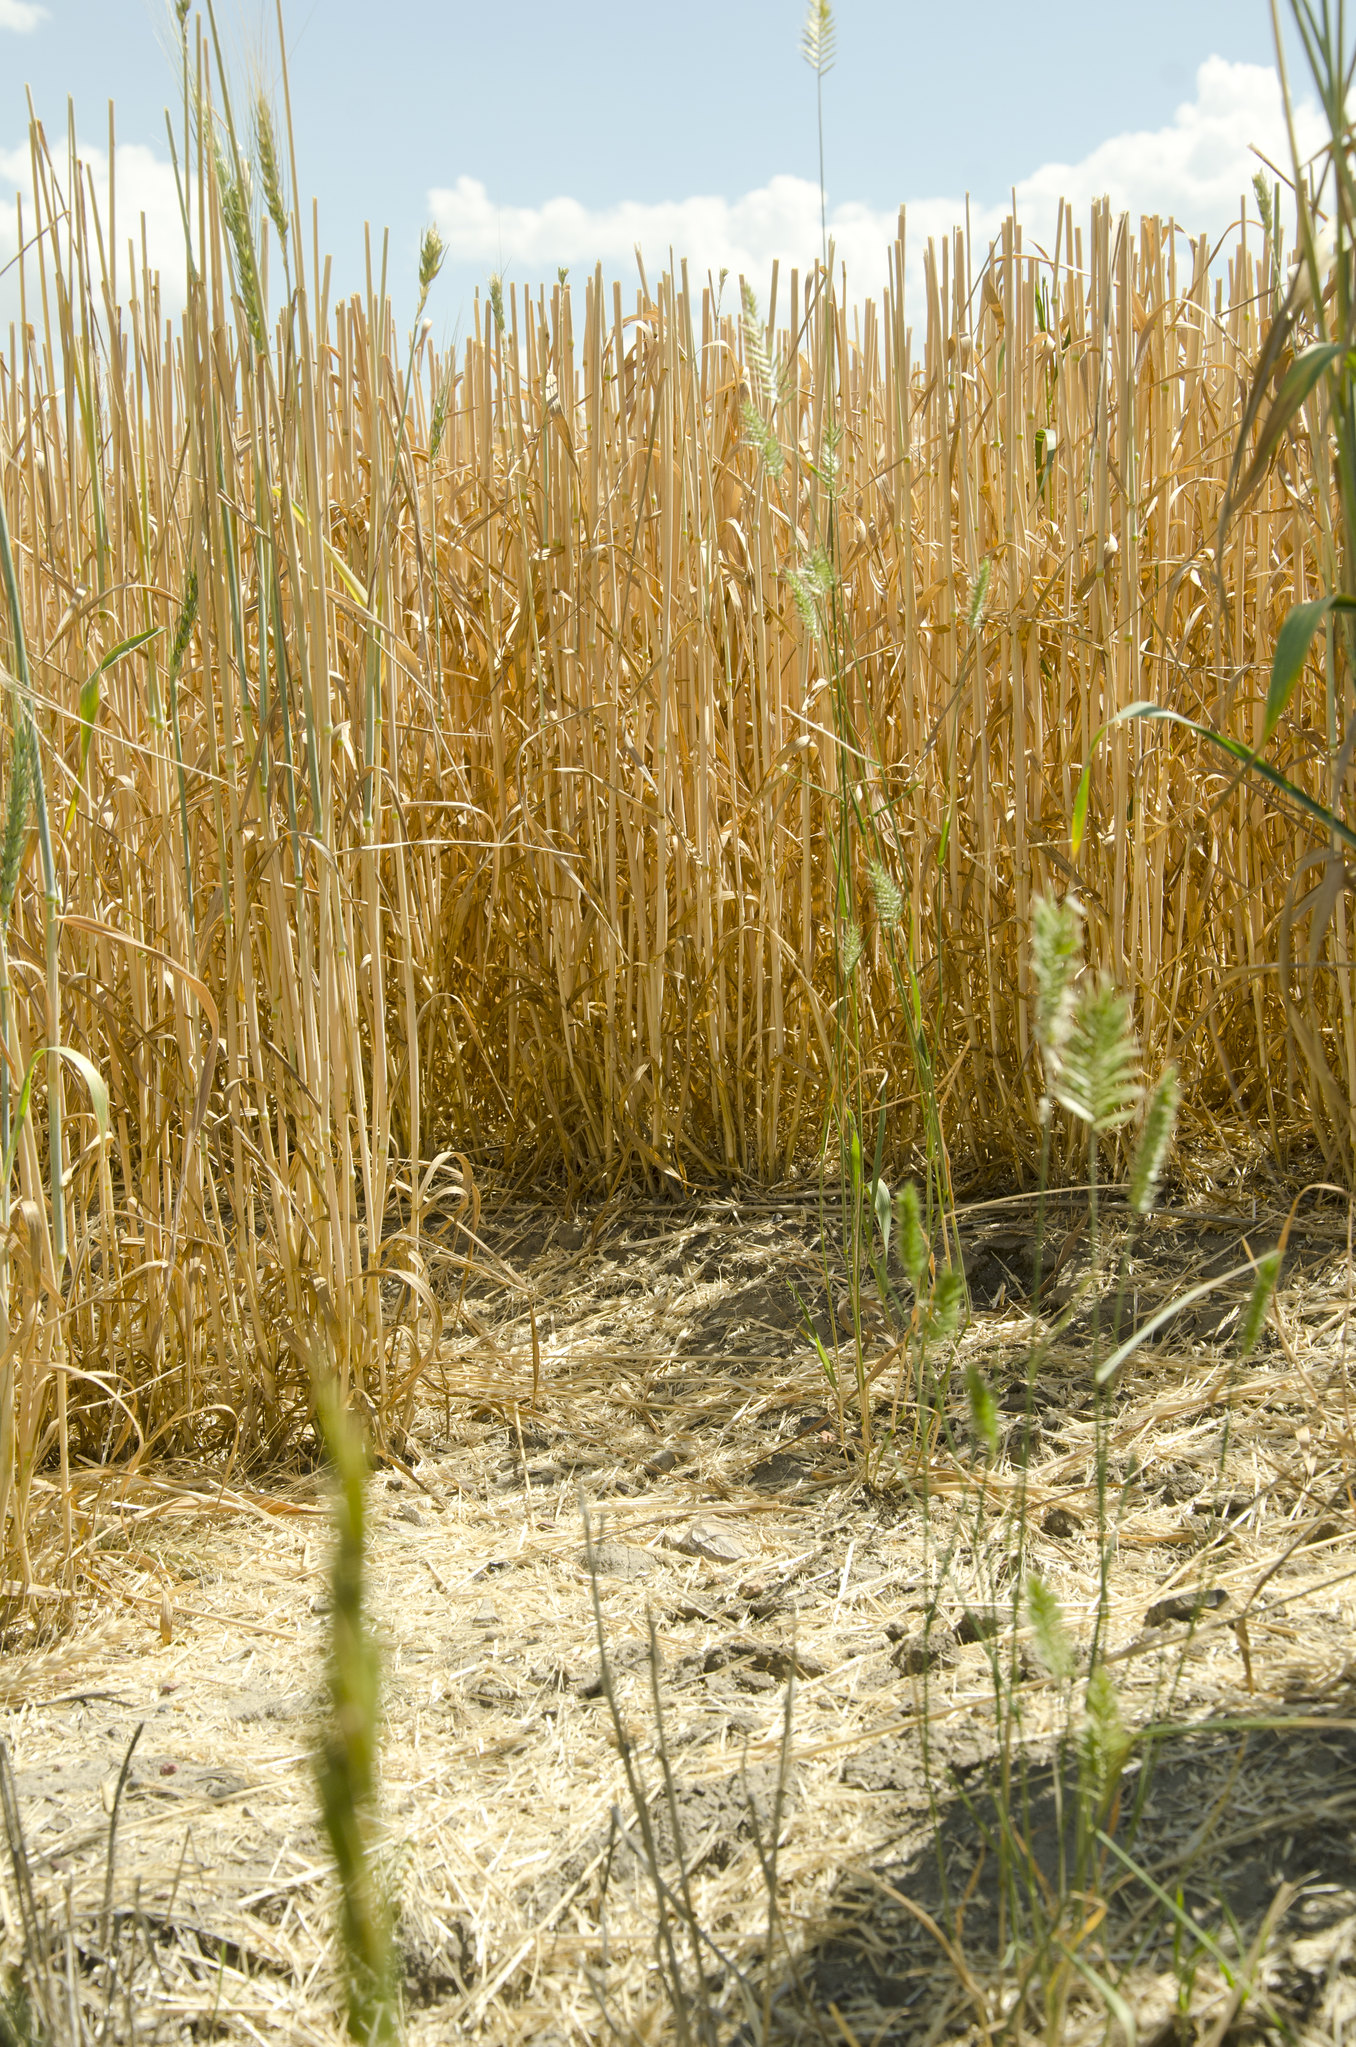 A no-till winter wheat crop with crop residue and litter on the soil surface.